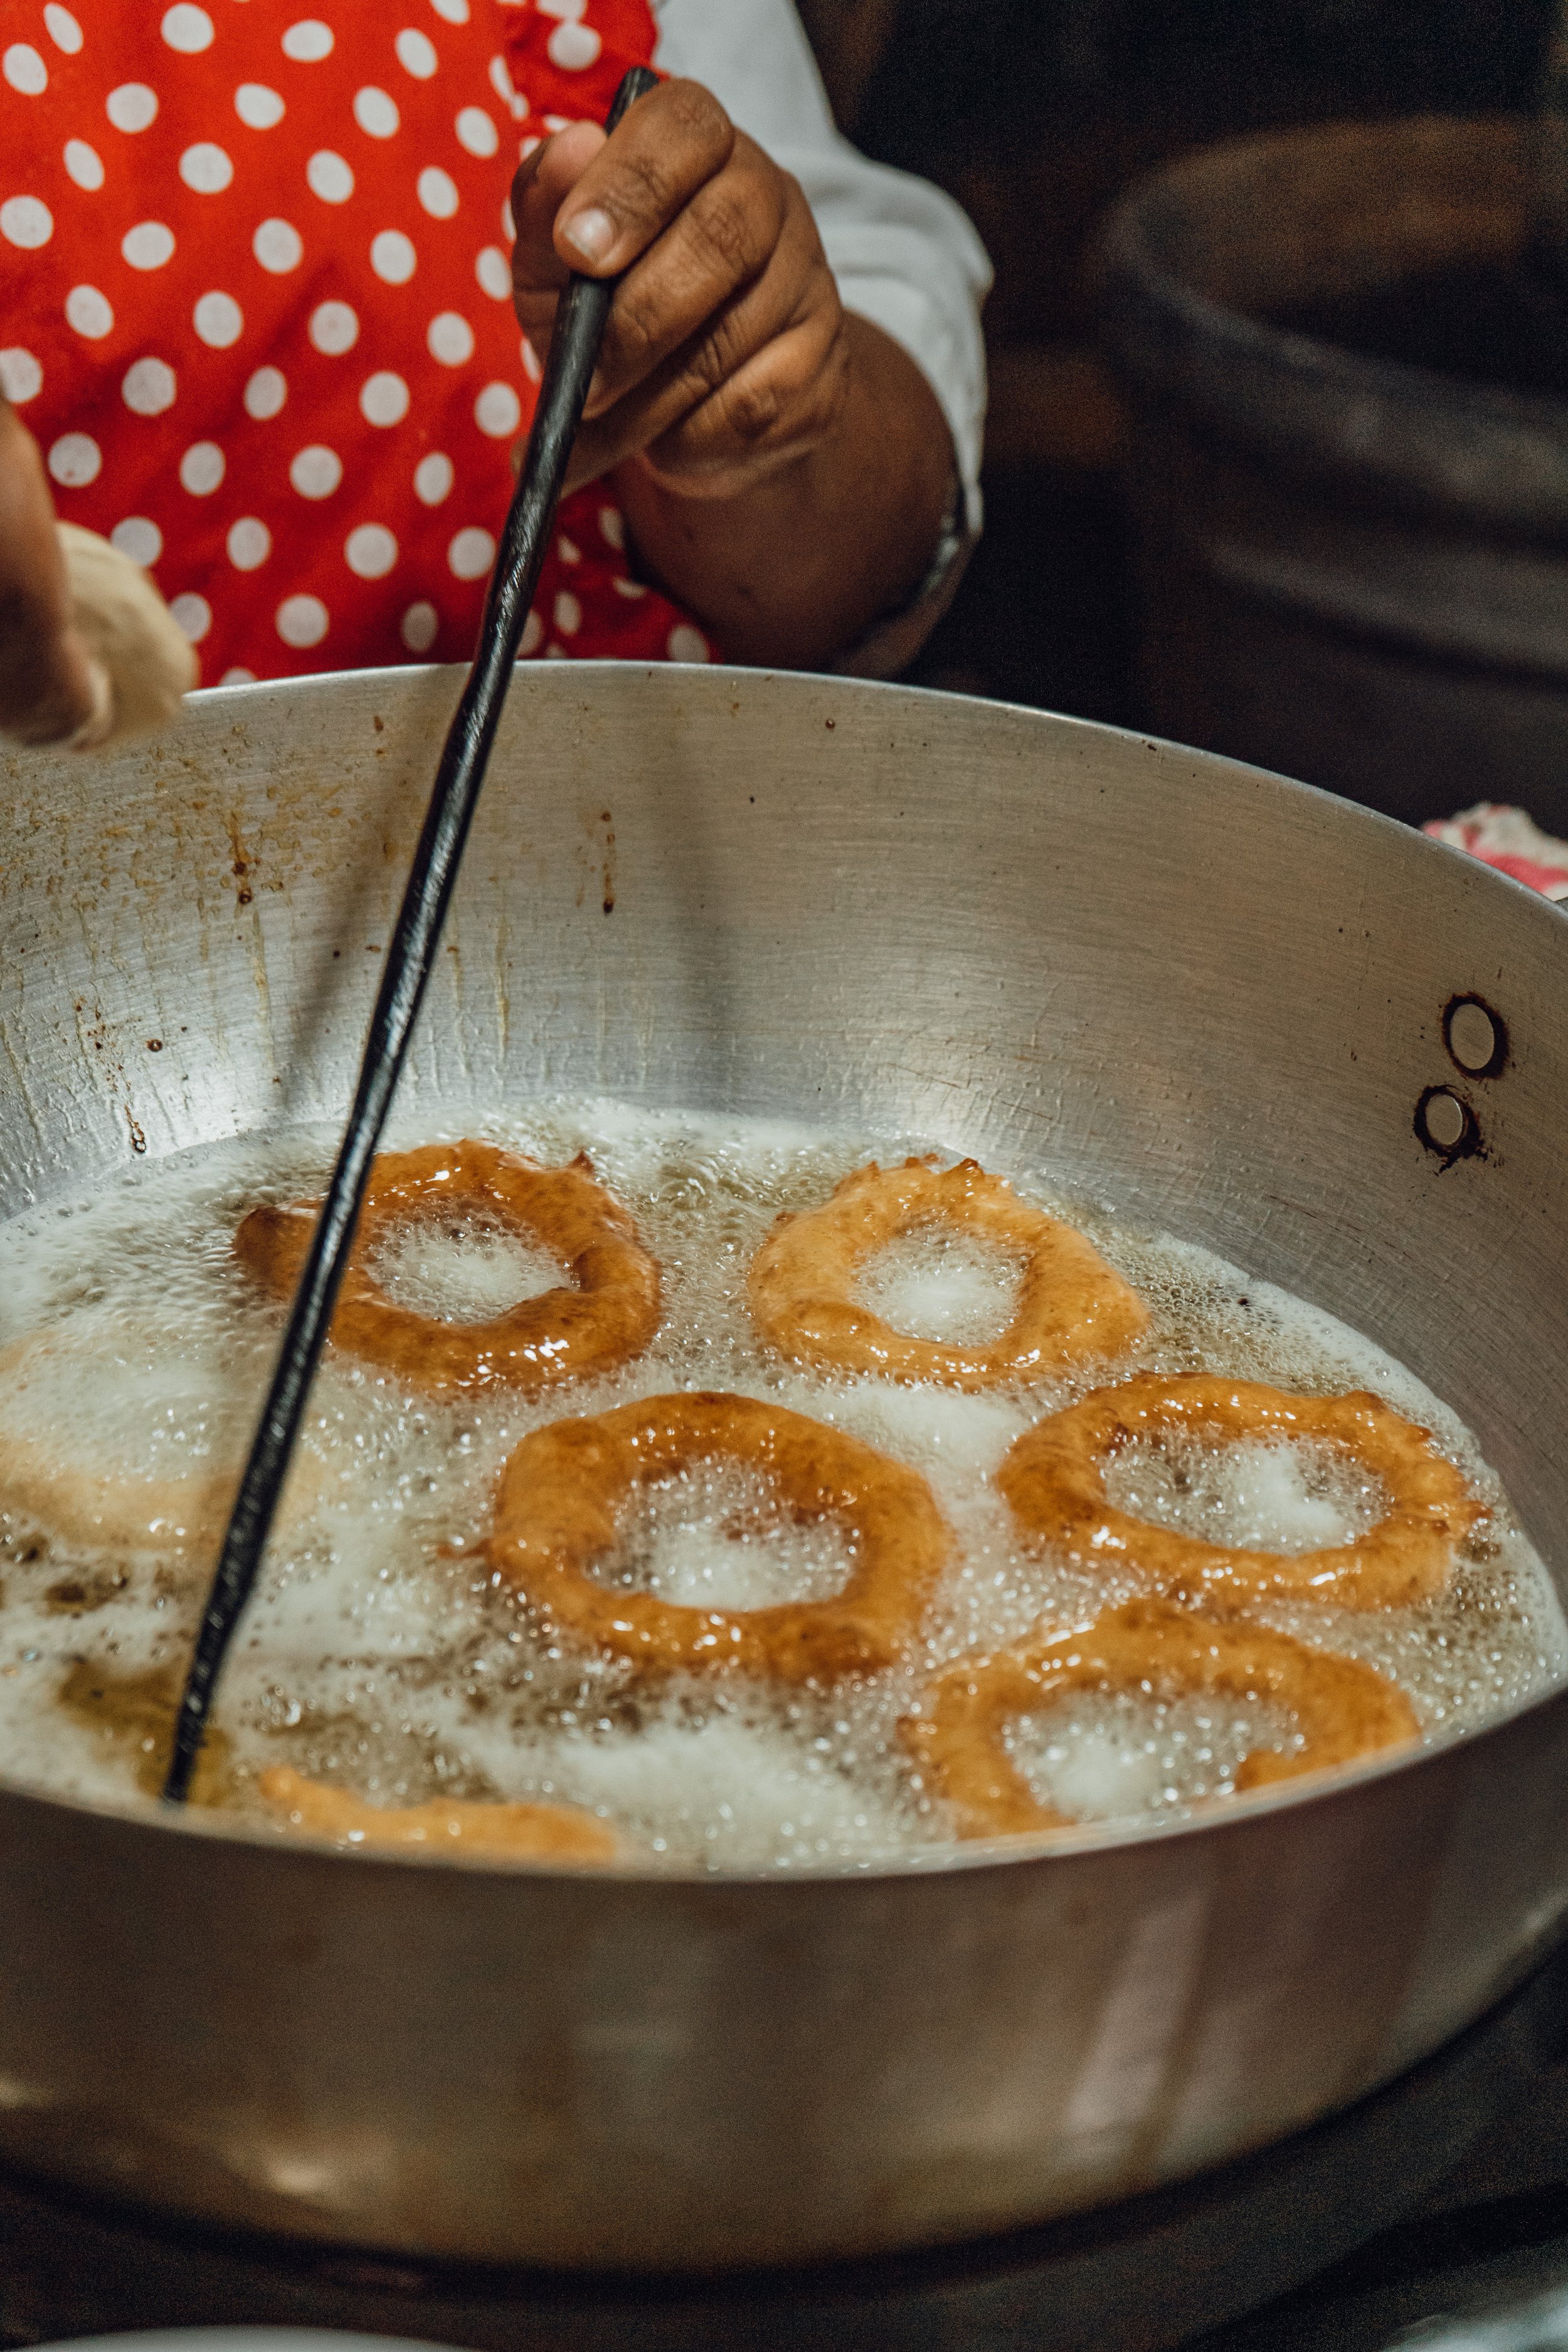 Picarones being fried